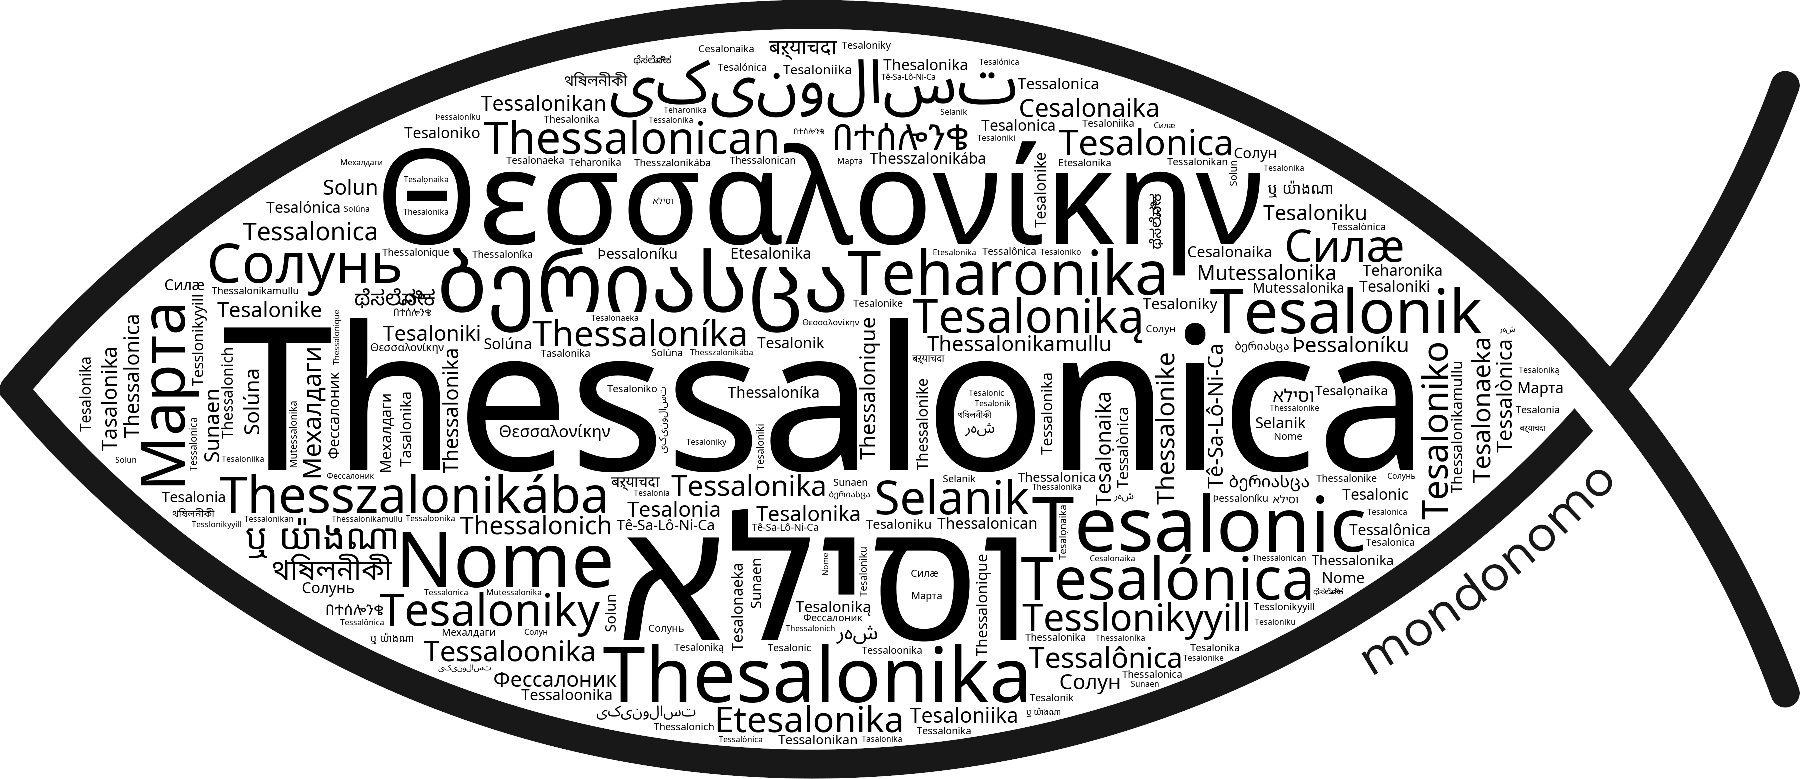 Name Thessalonica in the world's Bibles